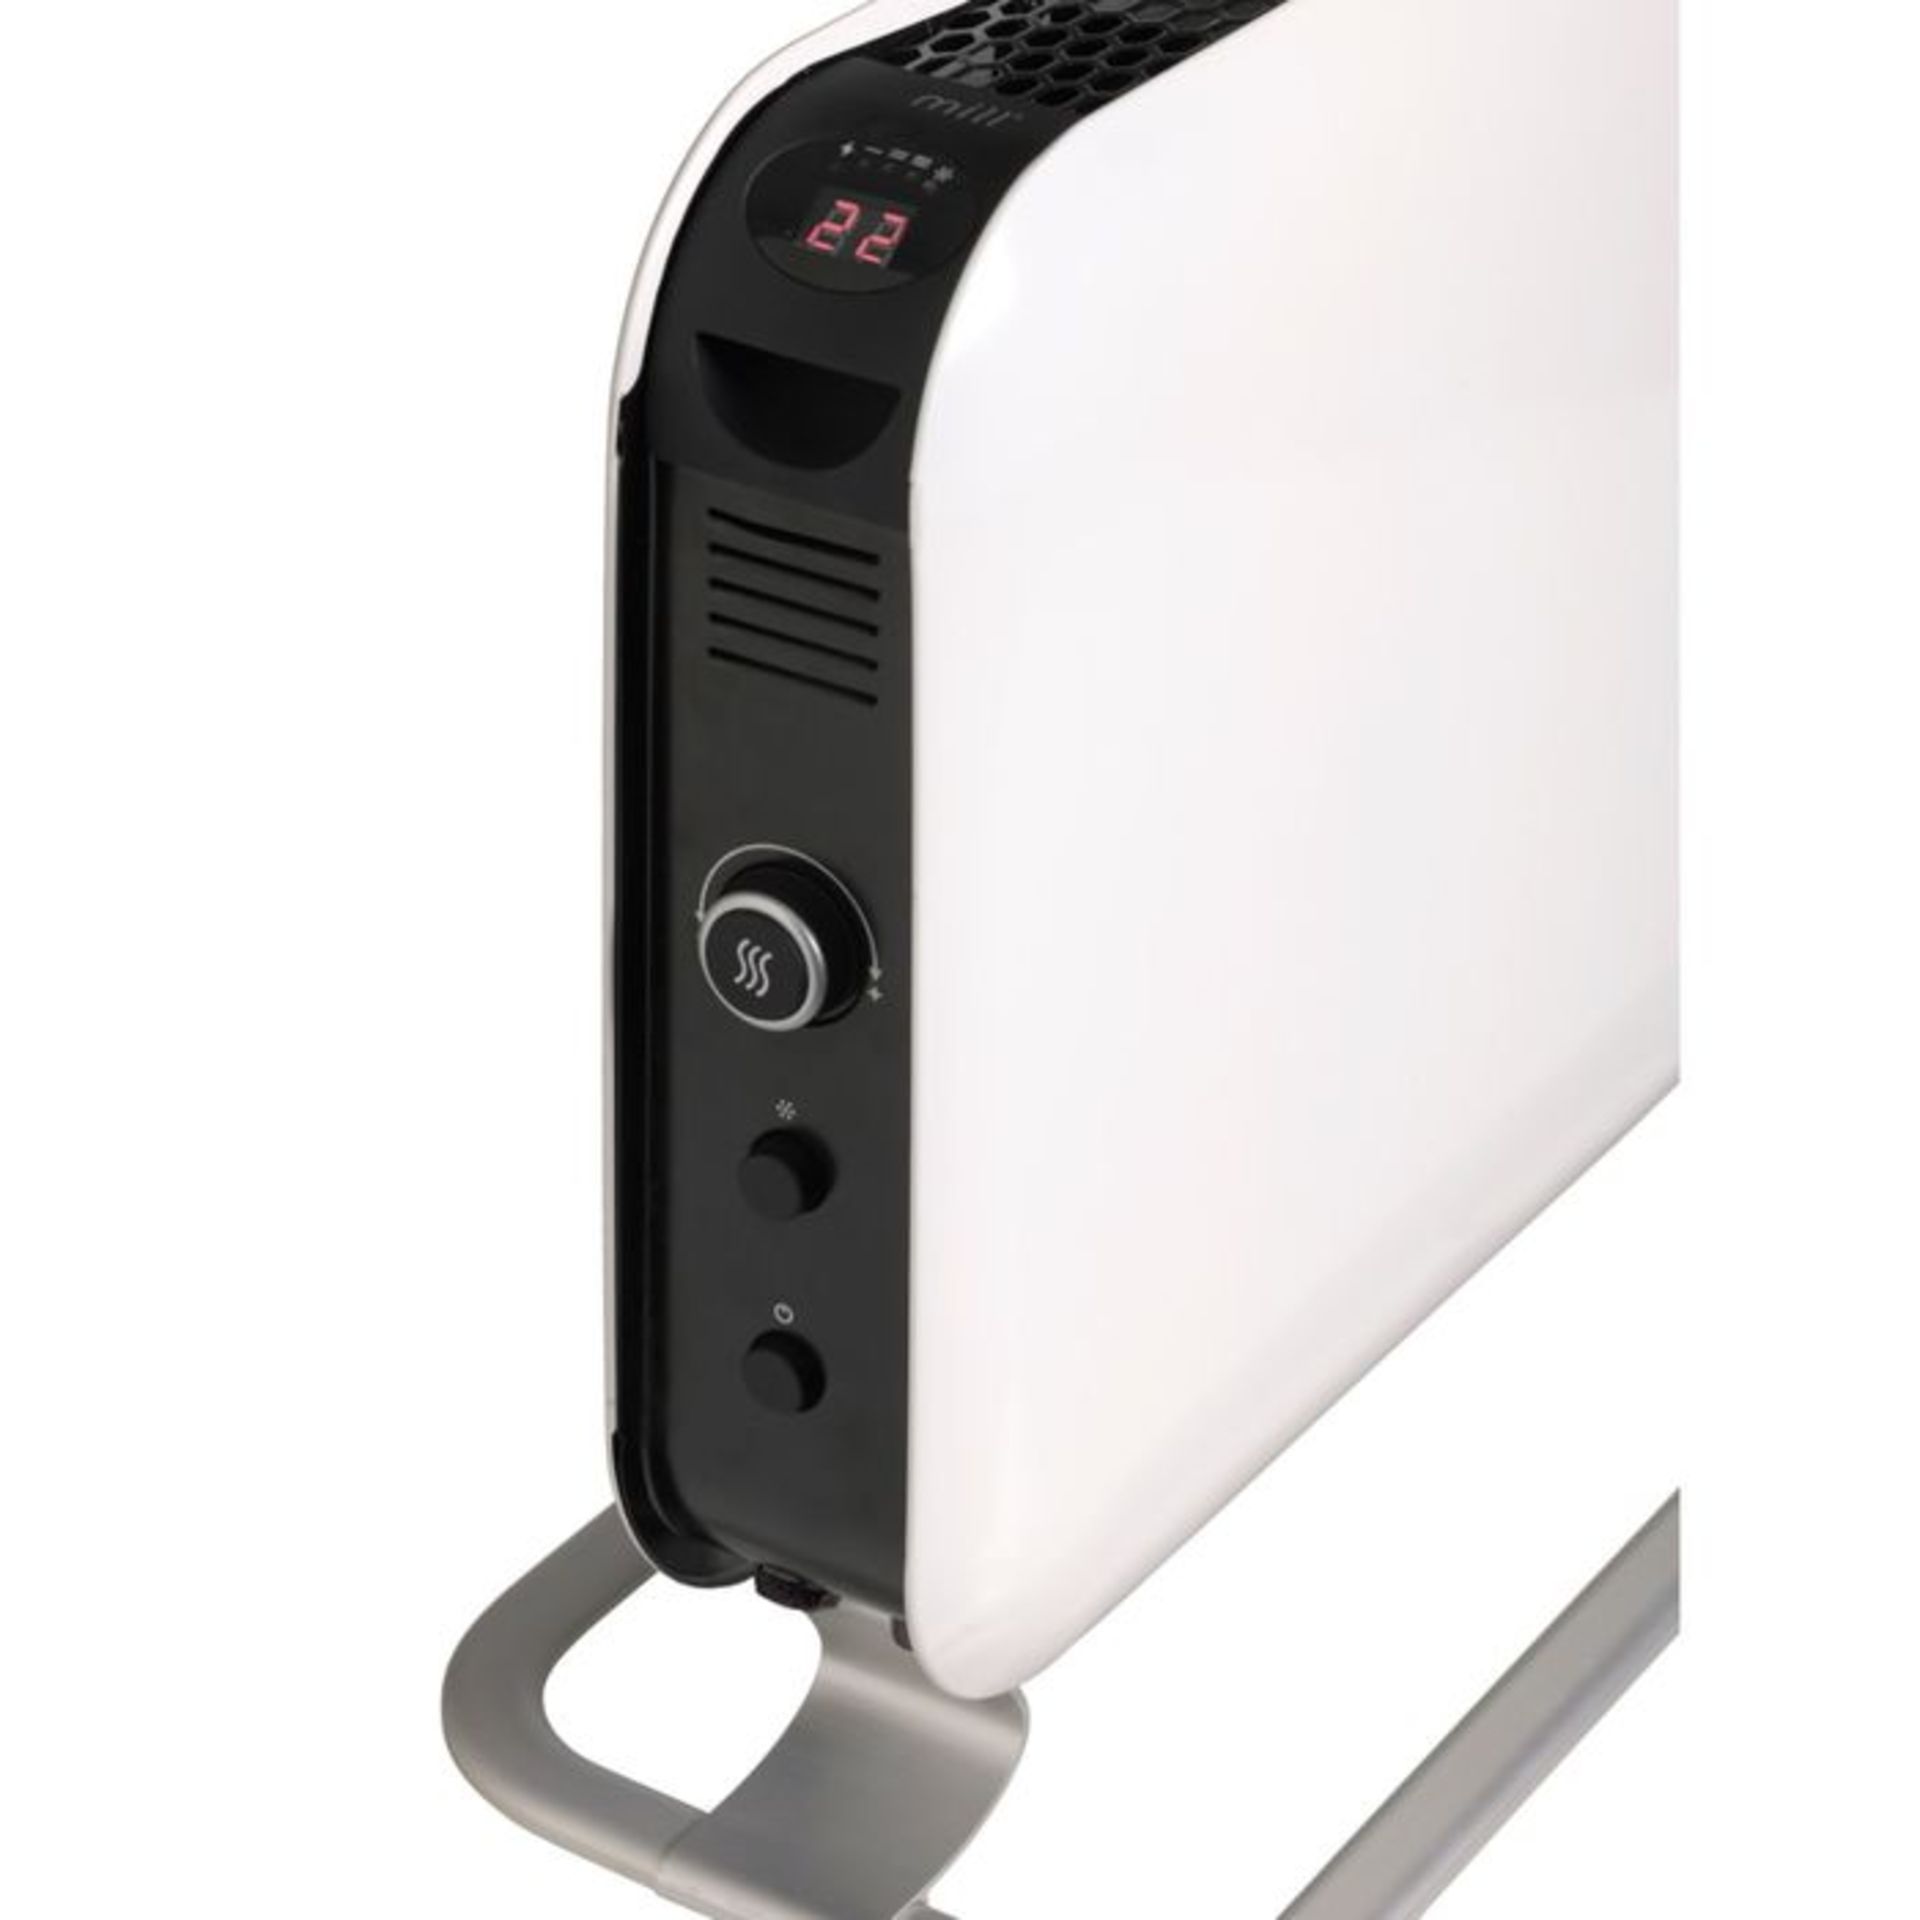 (ZZ115) White Mill Heat 2000w LED Convection Heater 405x670mm. Energy efficient, cost saving - Image 2 of 3